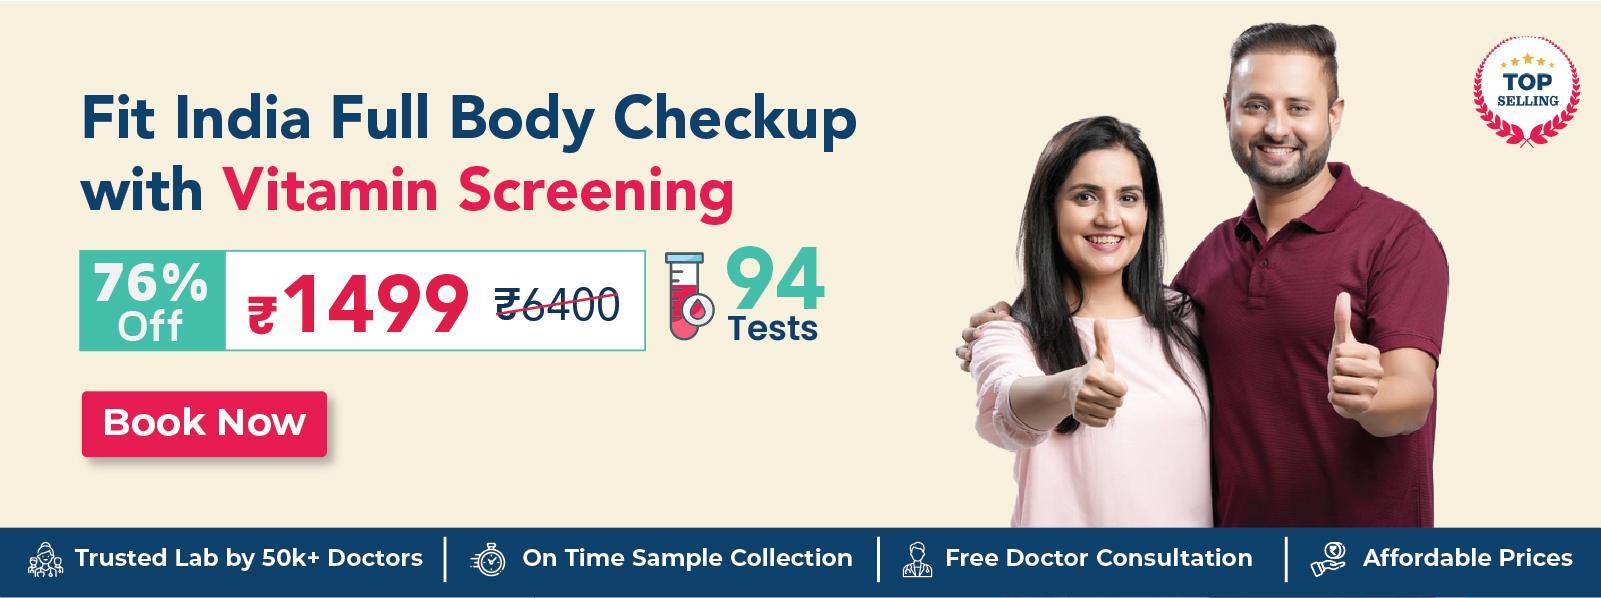 Fit India Full Body checkup with Vitamin Screening in Bareilly